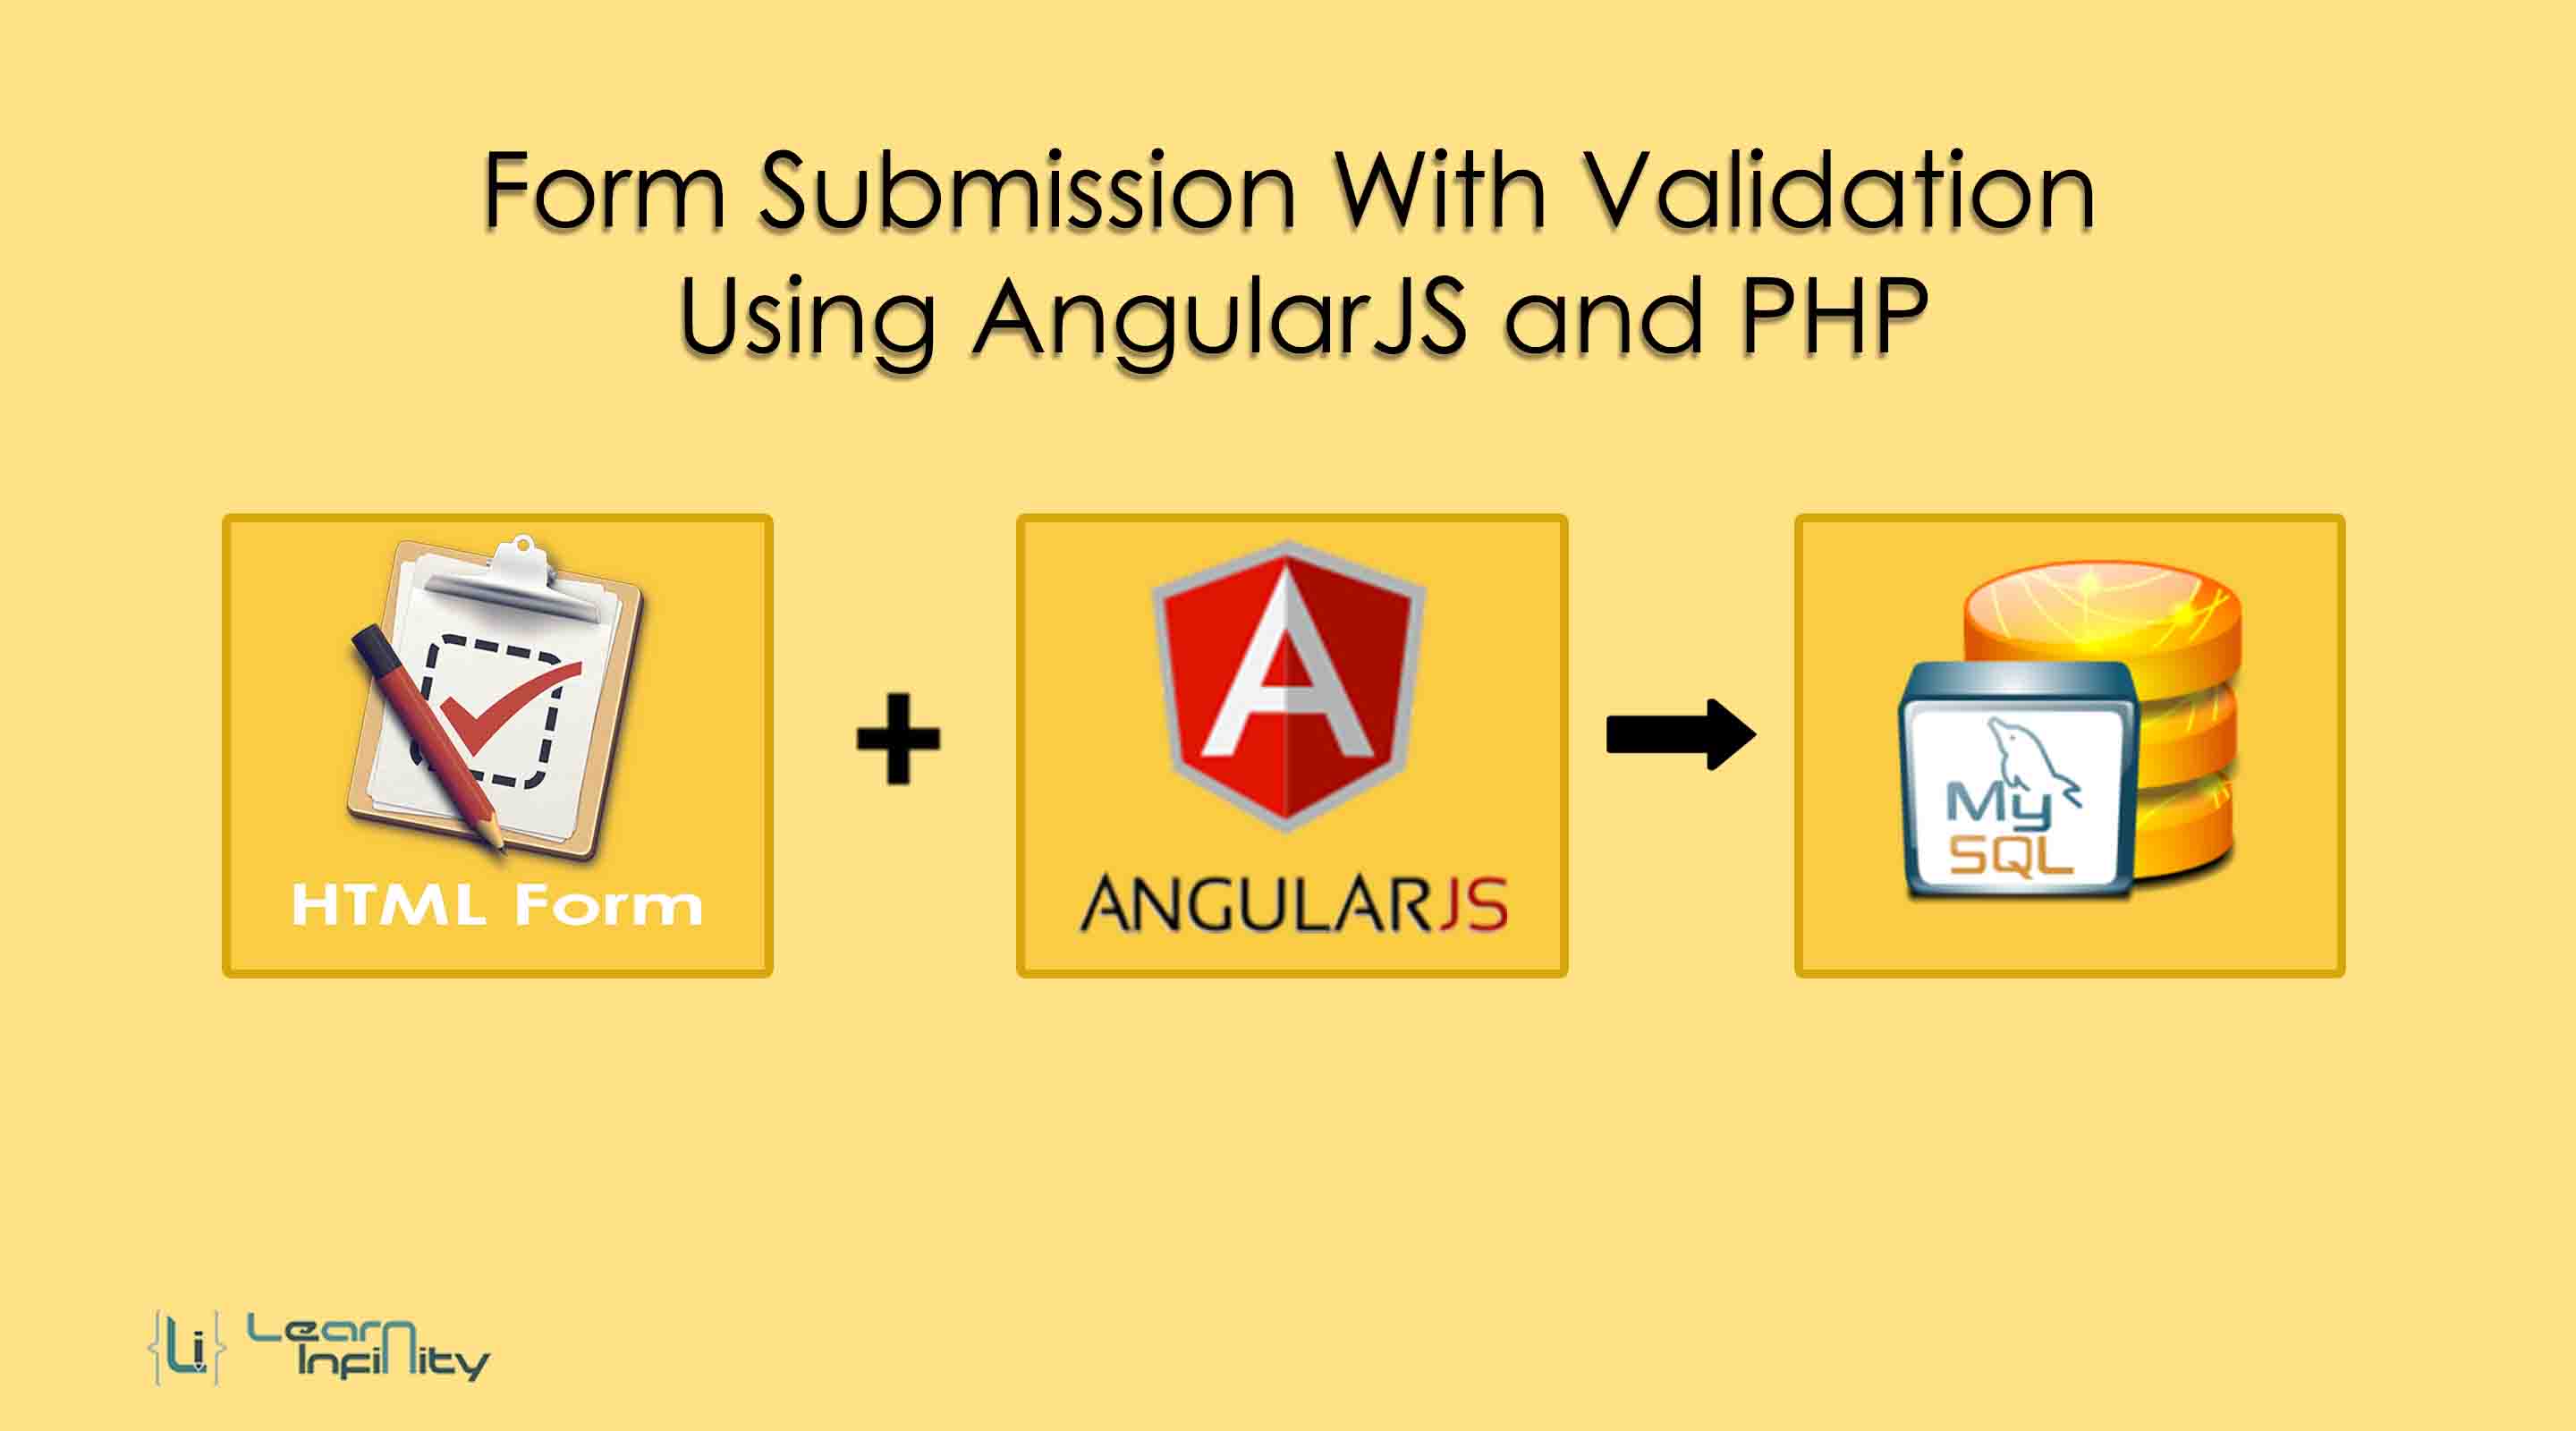 Form Submission With Validation Using AngularJS and PHP